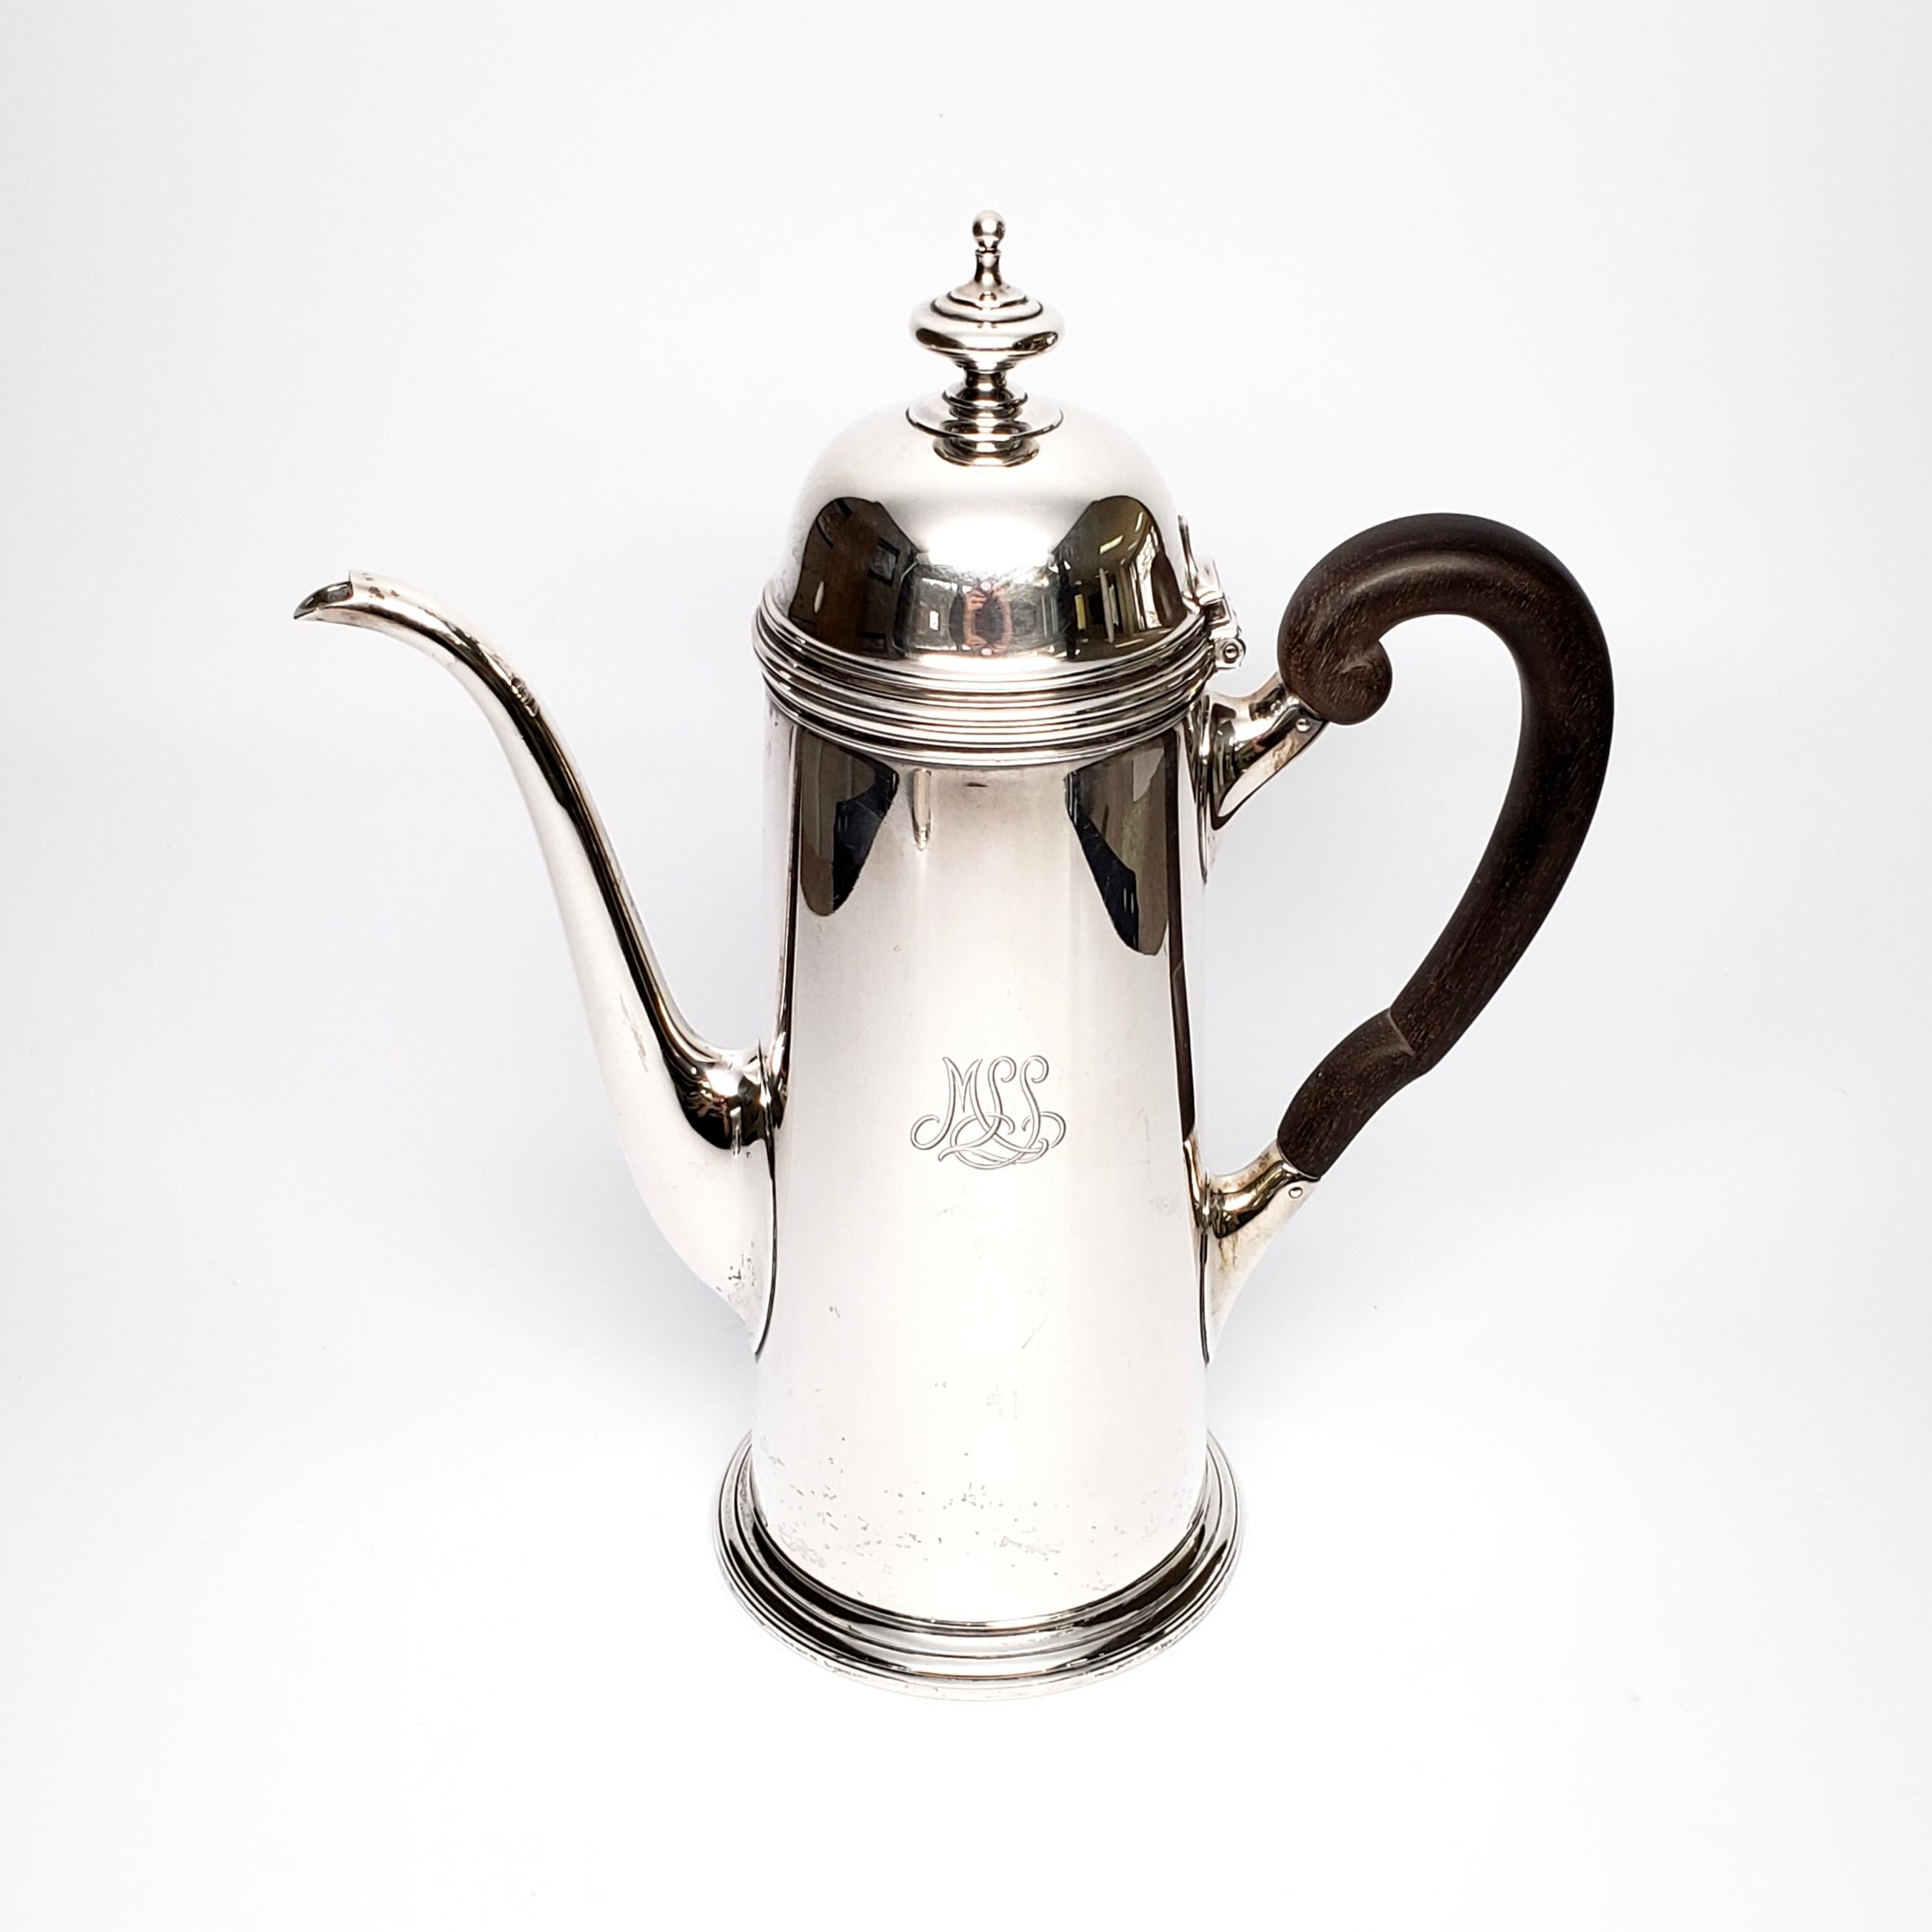 Sterling silver 3 piece coffee set, from Tiffany & Co.

The 3 pieces of this beautiful Tiffany & Co set include a tall coffee pot, open creamer and lidded sugar bowl. All pieces are marked with an M, representing manufacture between 1907-1947 under